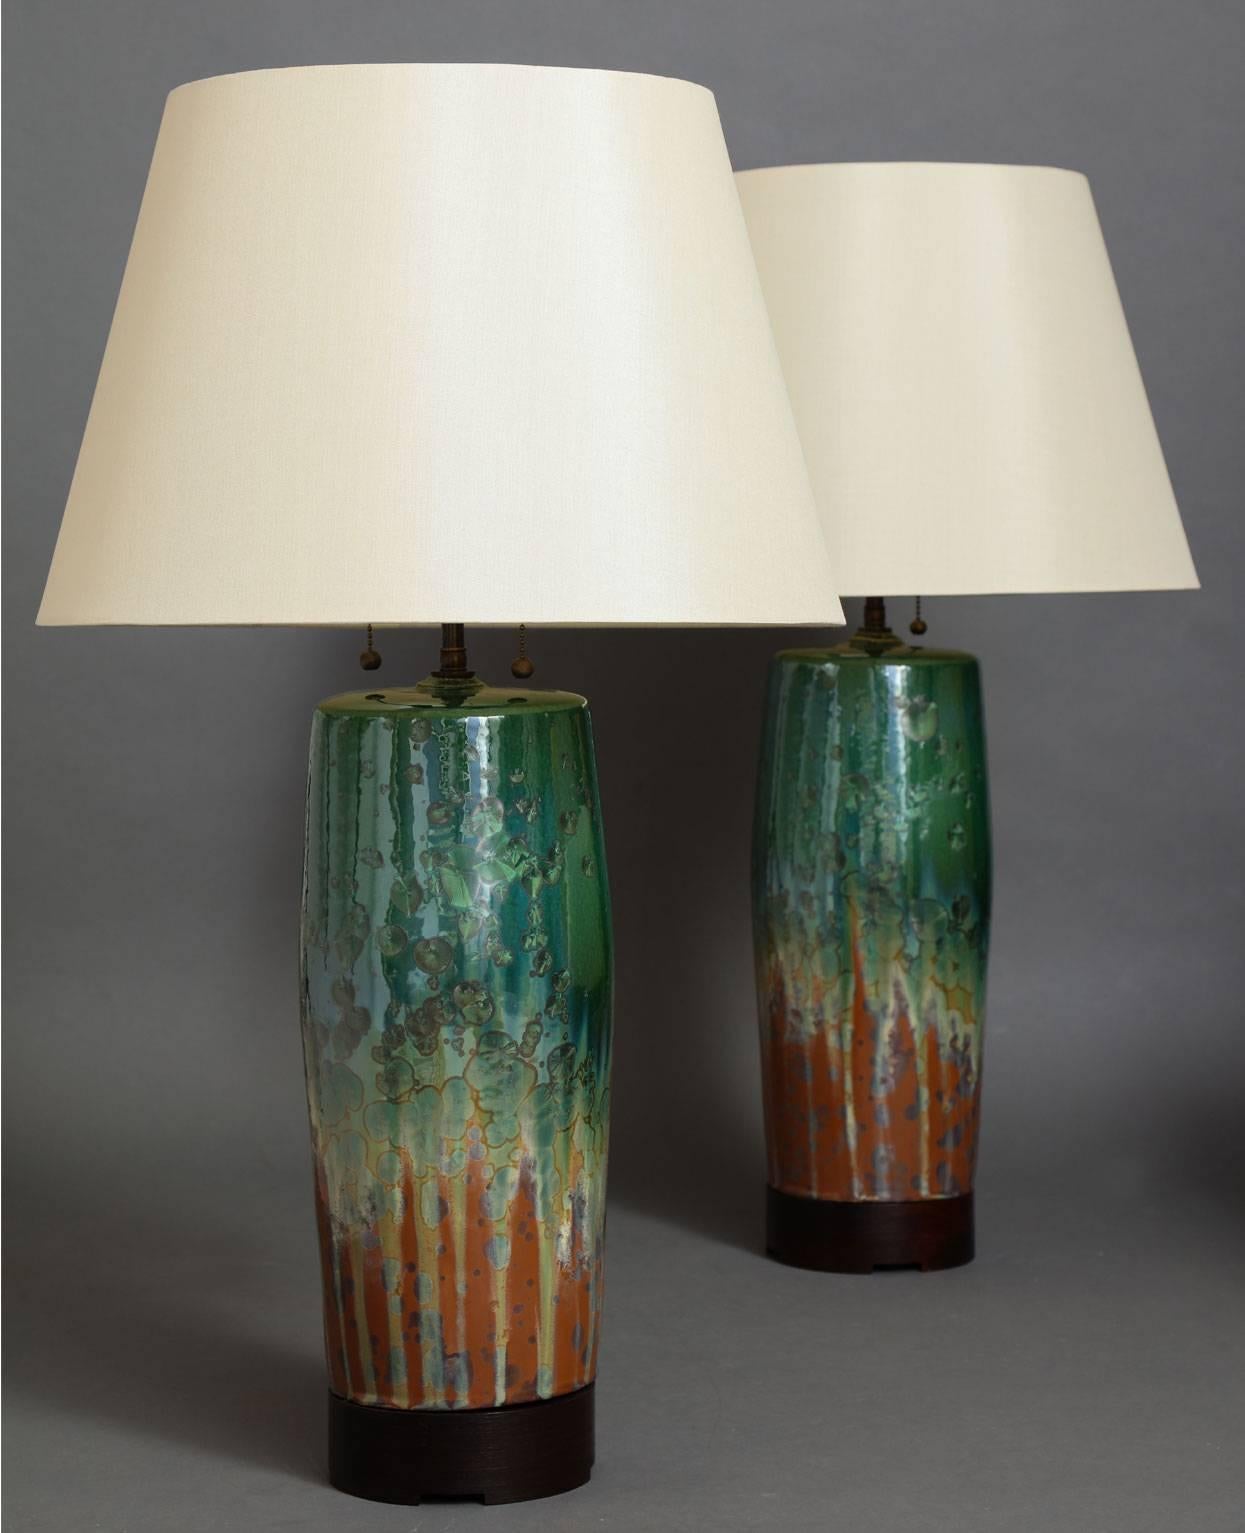 Bulldog table lamp.
Pair of hand-formed ceramic lamp base available in many beautiful glazes, 
with optional wood bases available in two heights and a variety of wood finishes. Wired with two-bulb cluster in either antique brass or polished